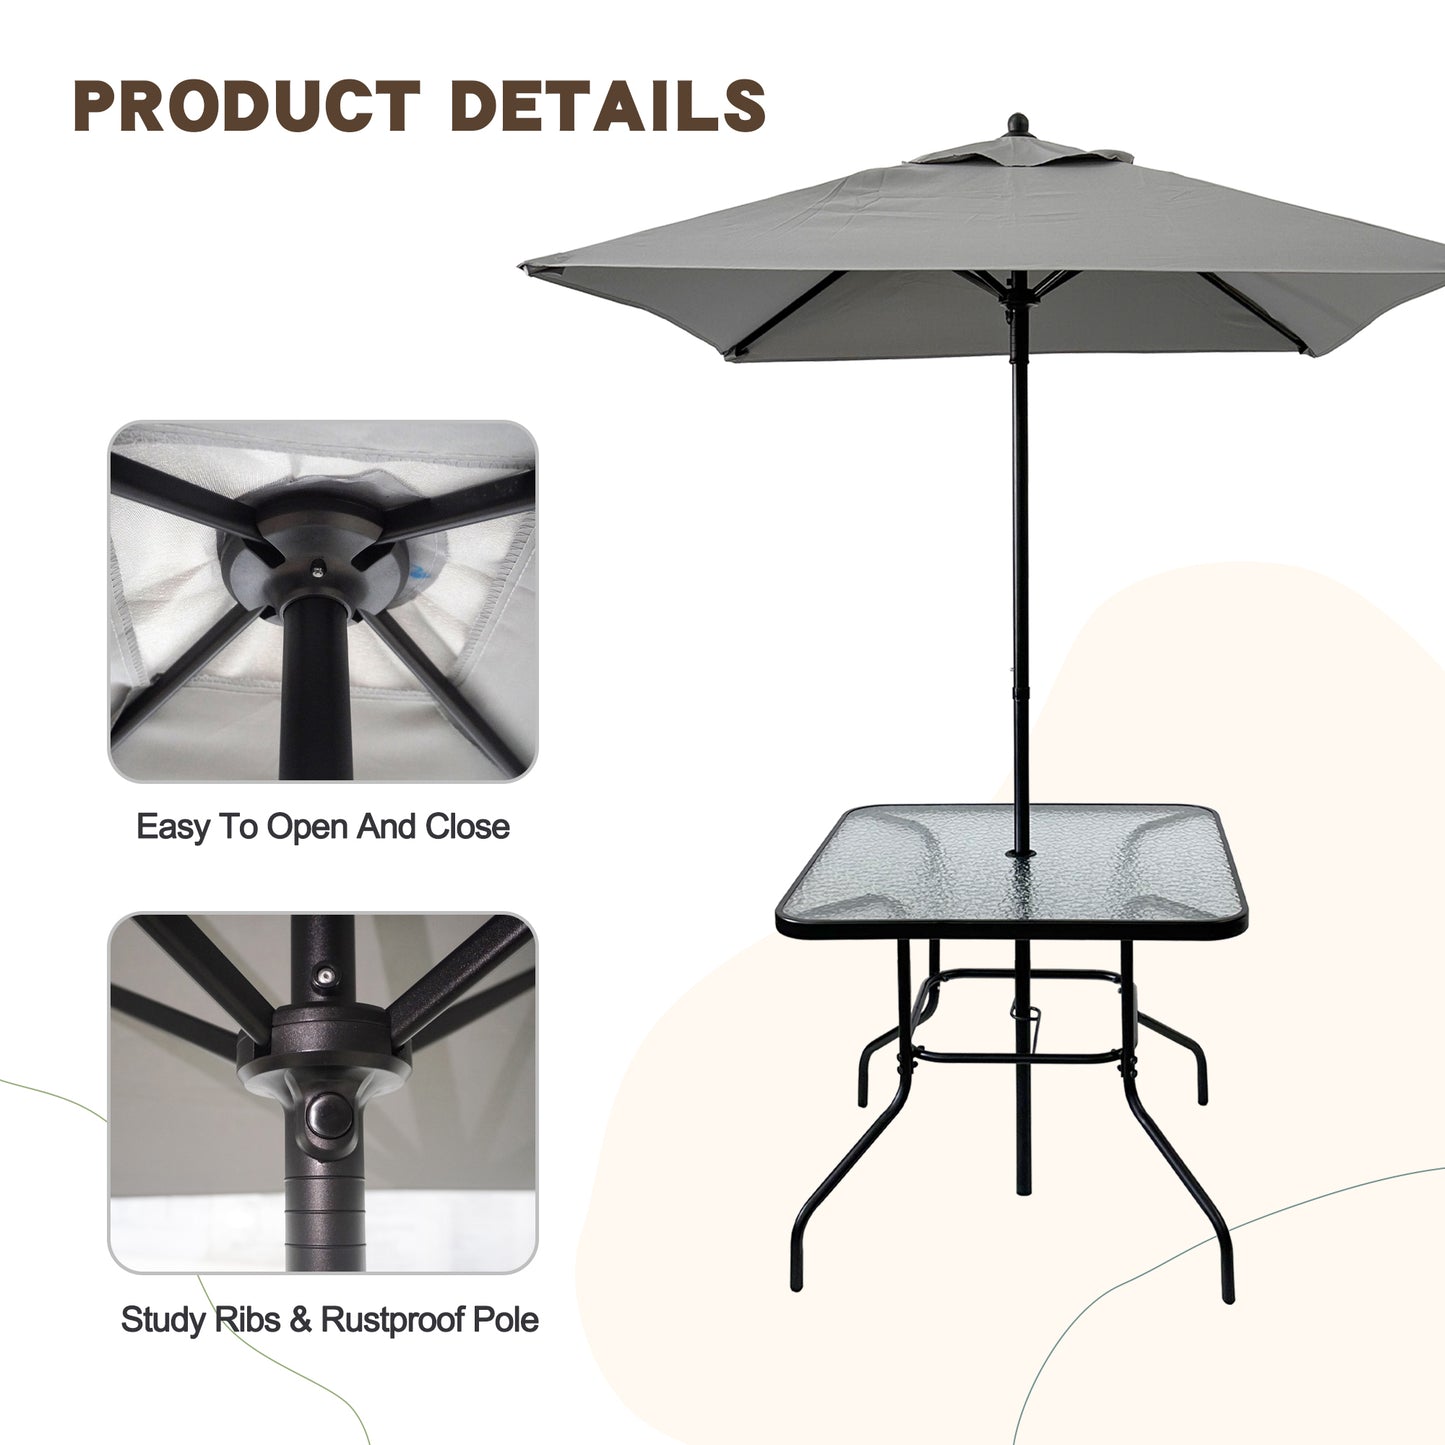 Outdoor Patio Dining Set for 4 People, Table and Chair Set, Umbrella